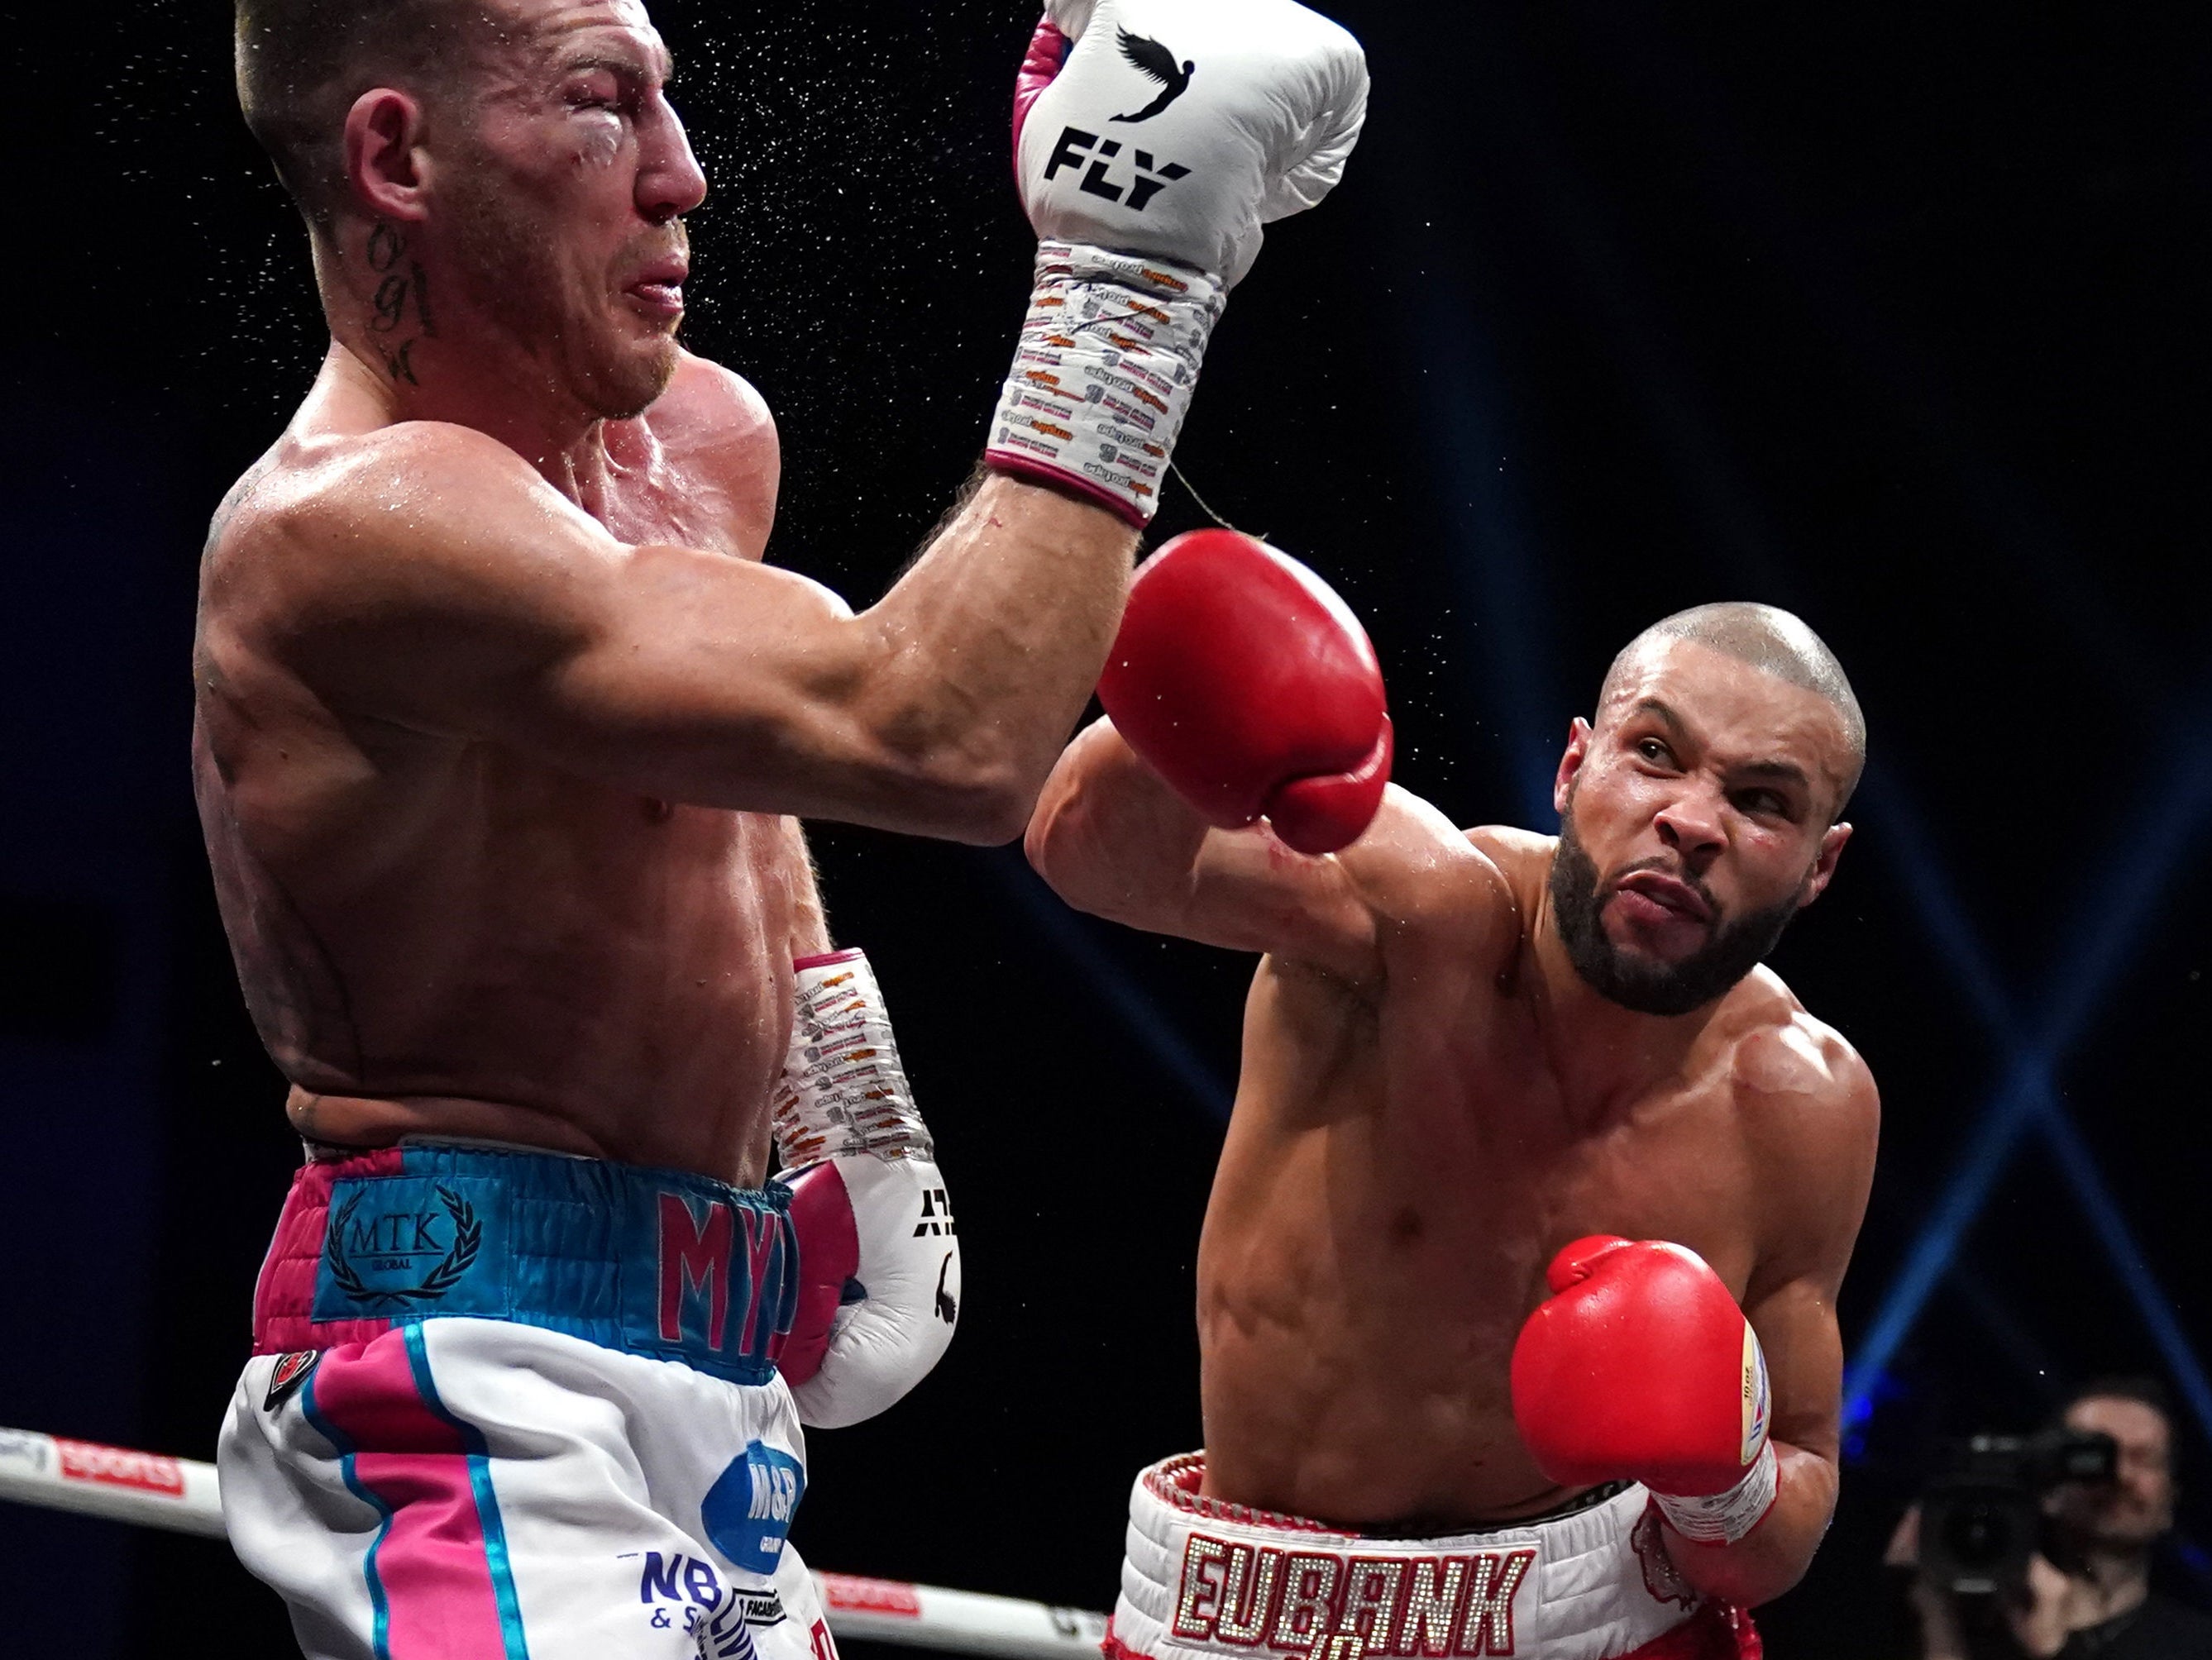 Eubank Jr vs Williams live Fight stream, latest updates and result tonight The Independent